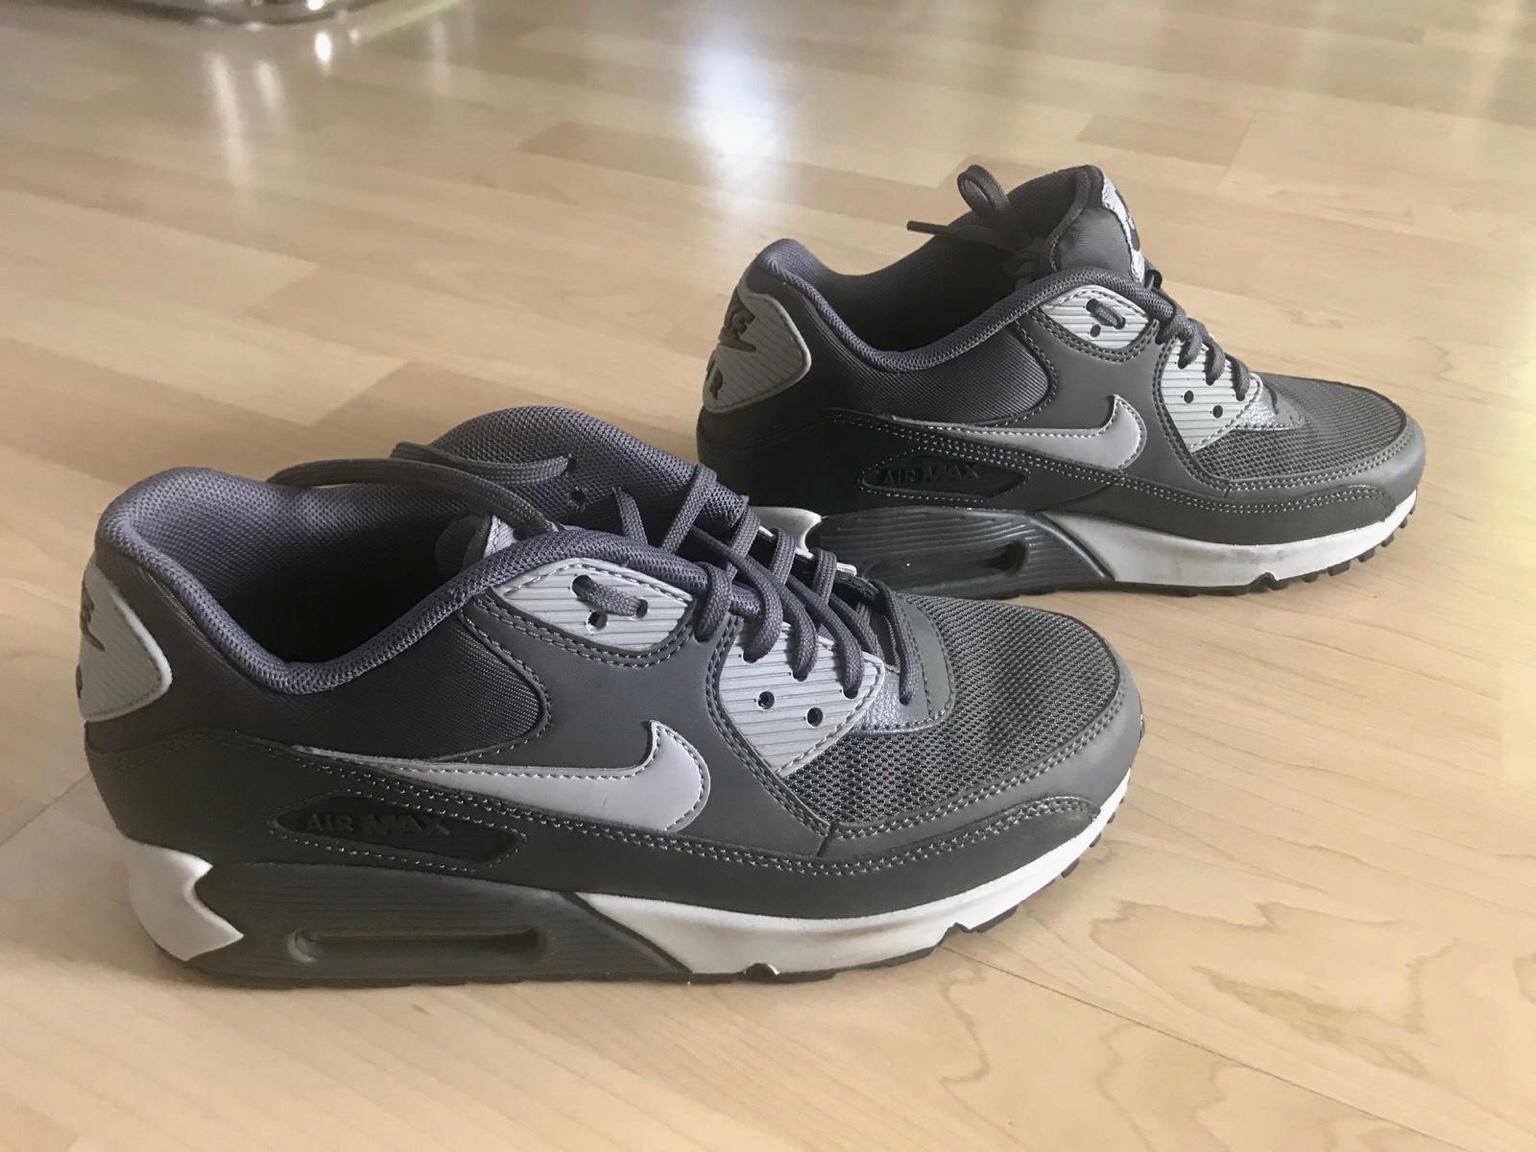 Nike Air Max VT2 in 68199 Mannheim for €80.00 for sale | Shpock